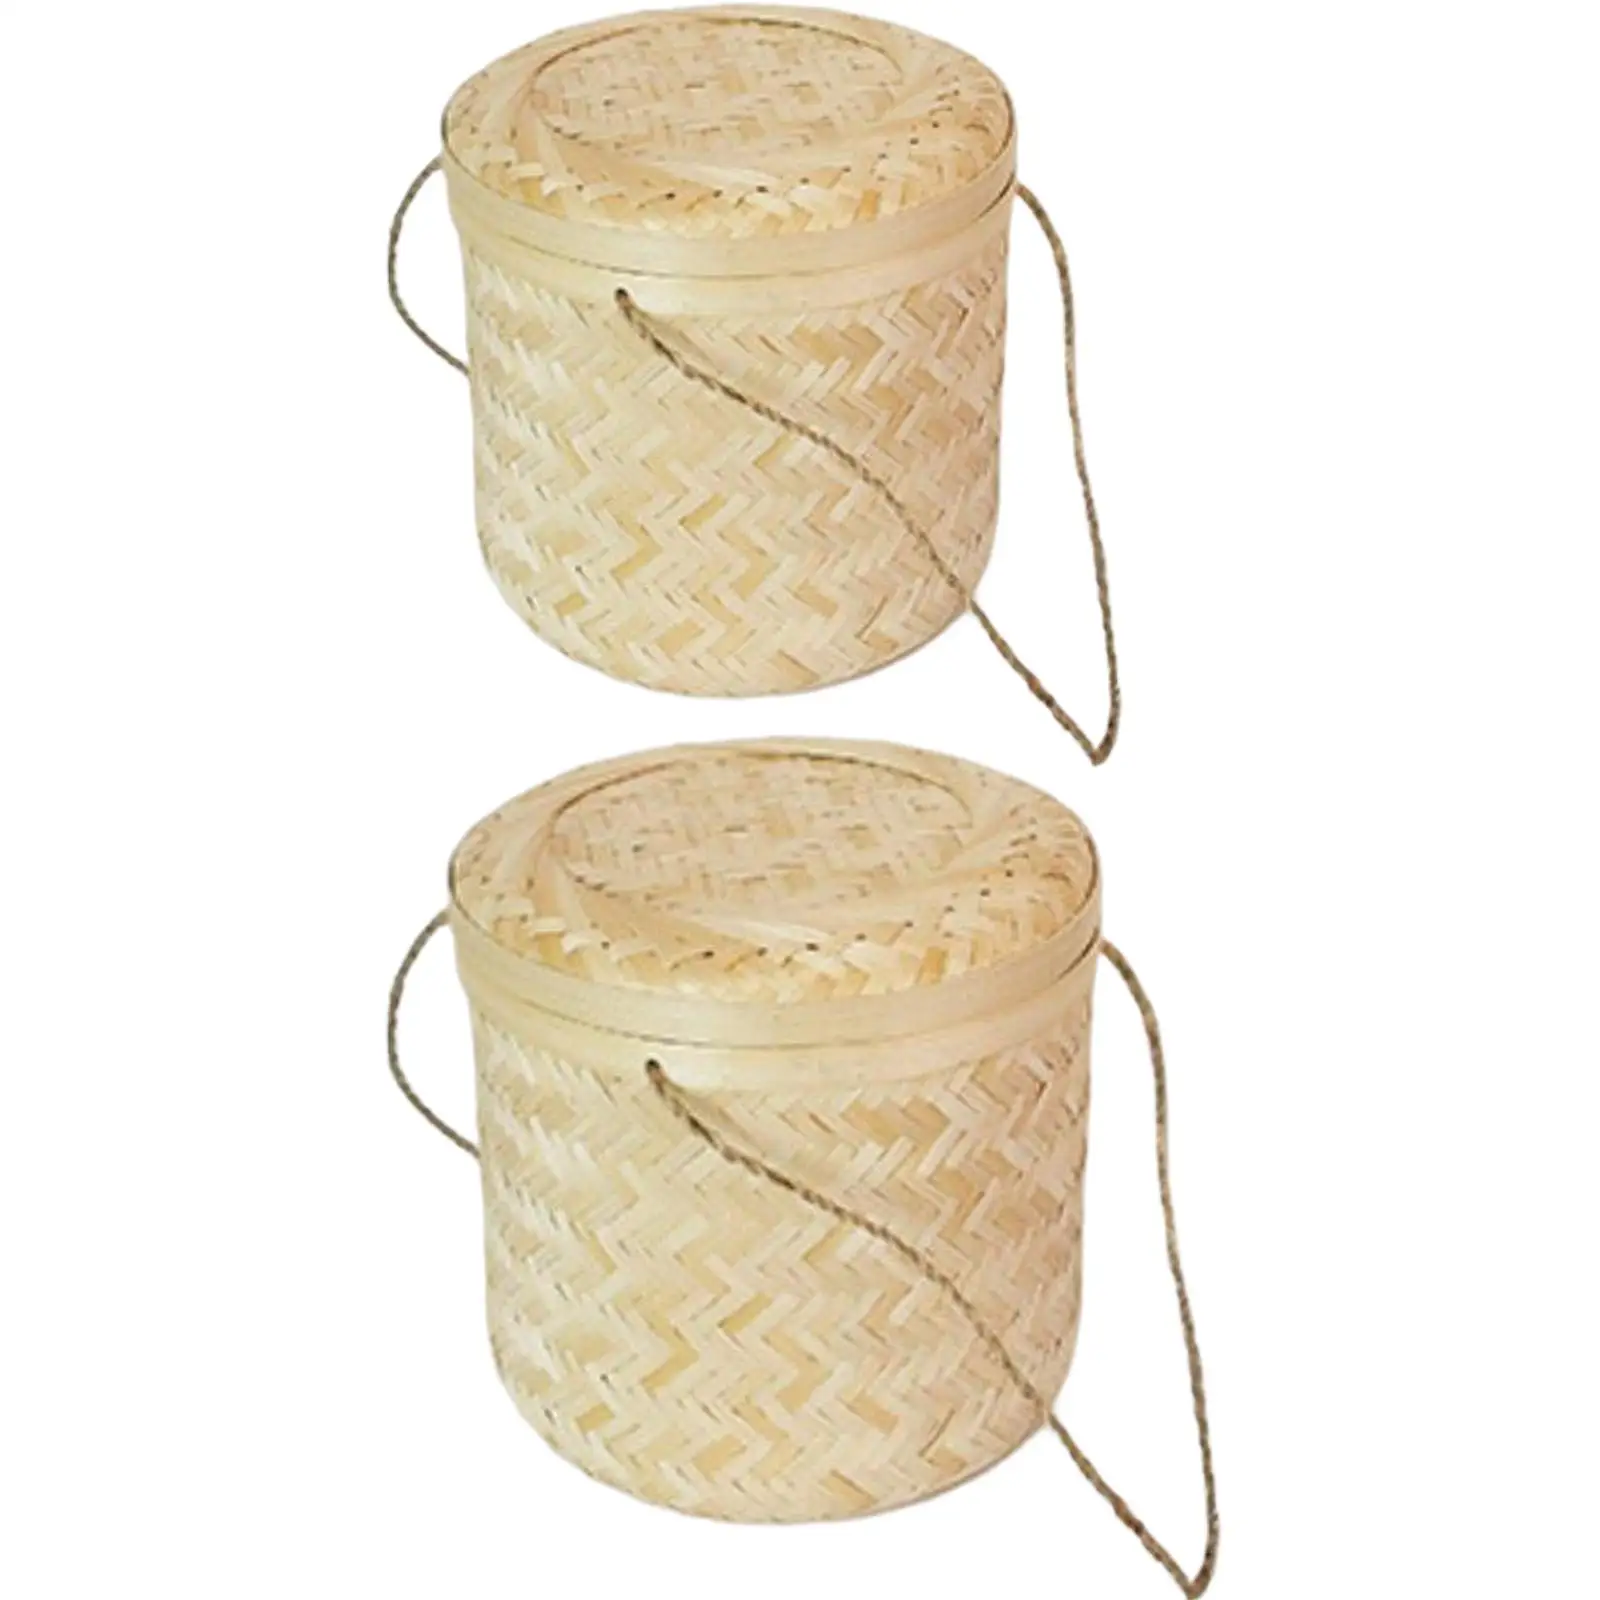 Woven Gift Basket Farmhouse Portable Serving Bamboo Basket with Handle Organizer for Food Bread Snacks Mooncake Fruits